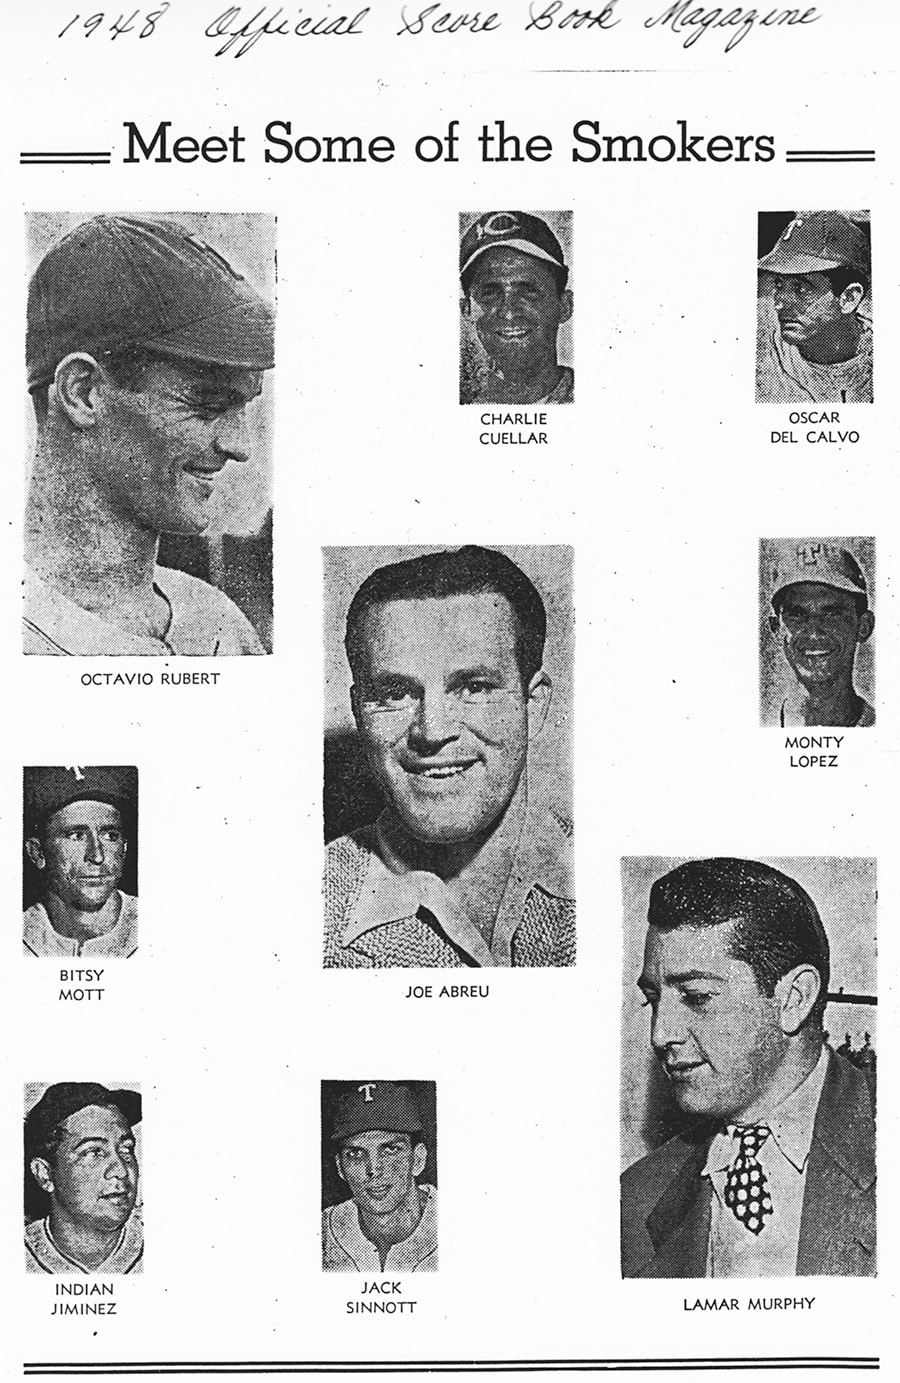 1948 Tampa Smokers page from the official score book magazine.